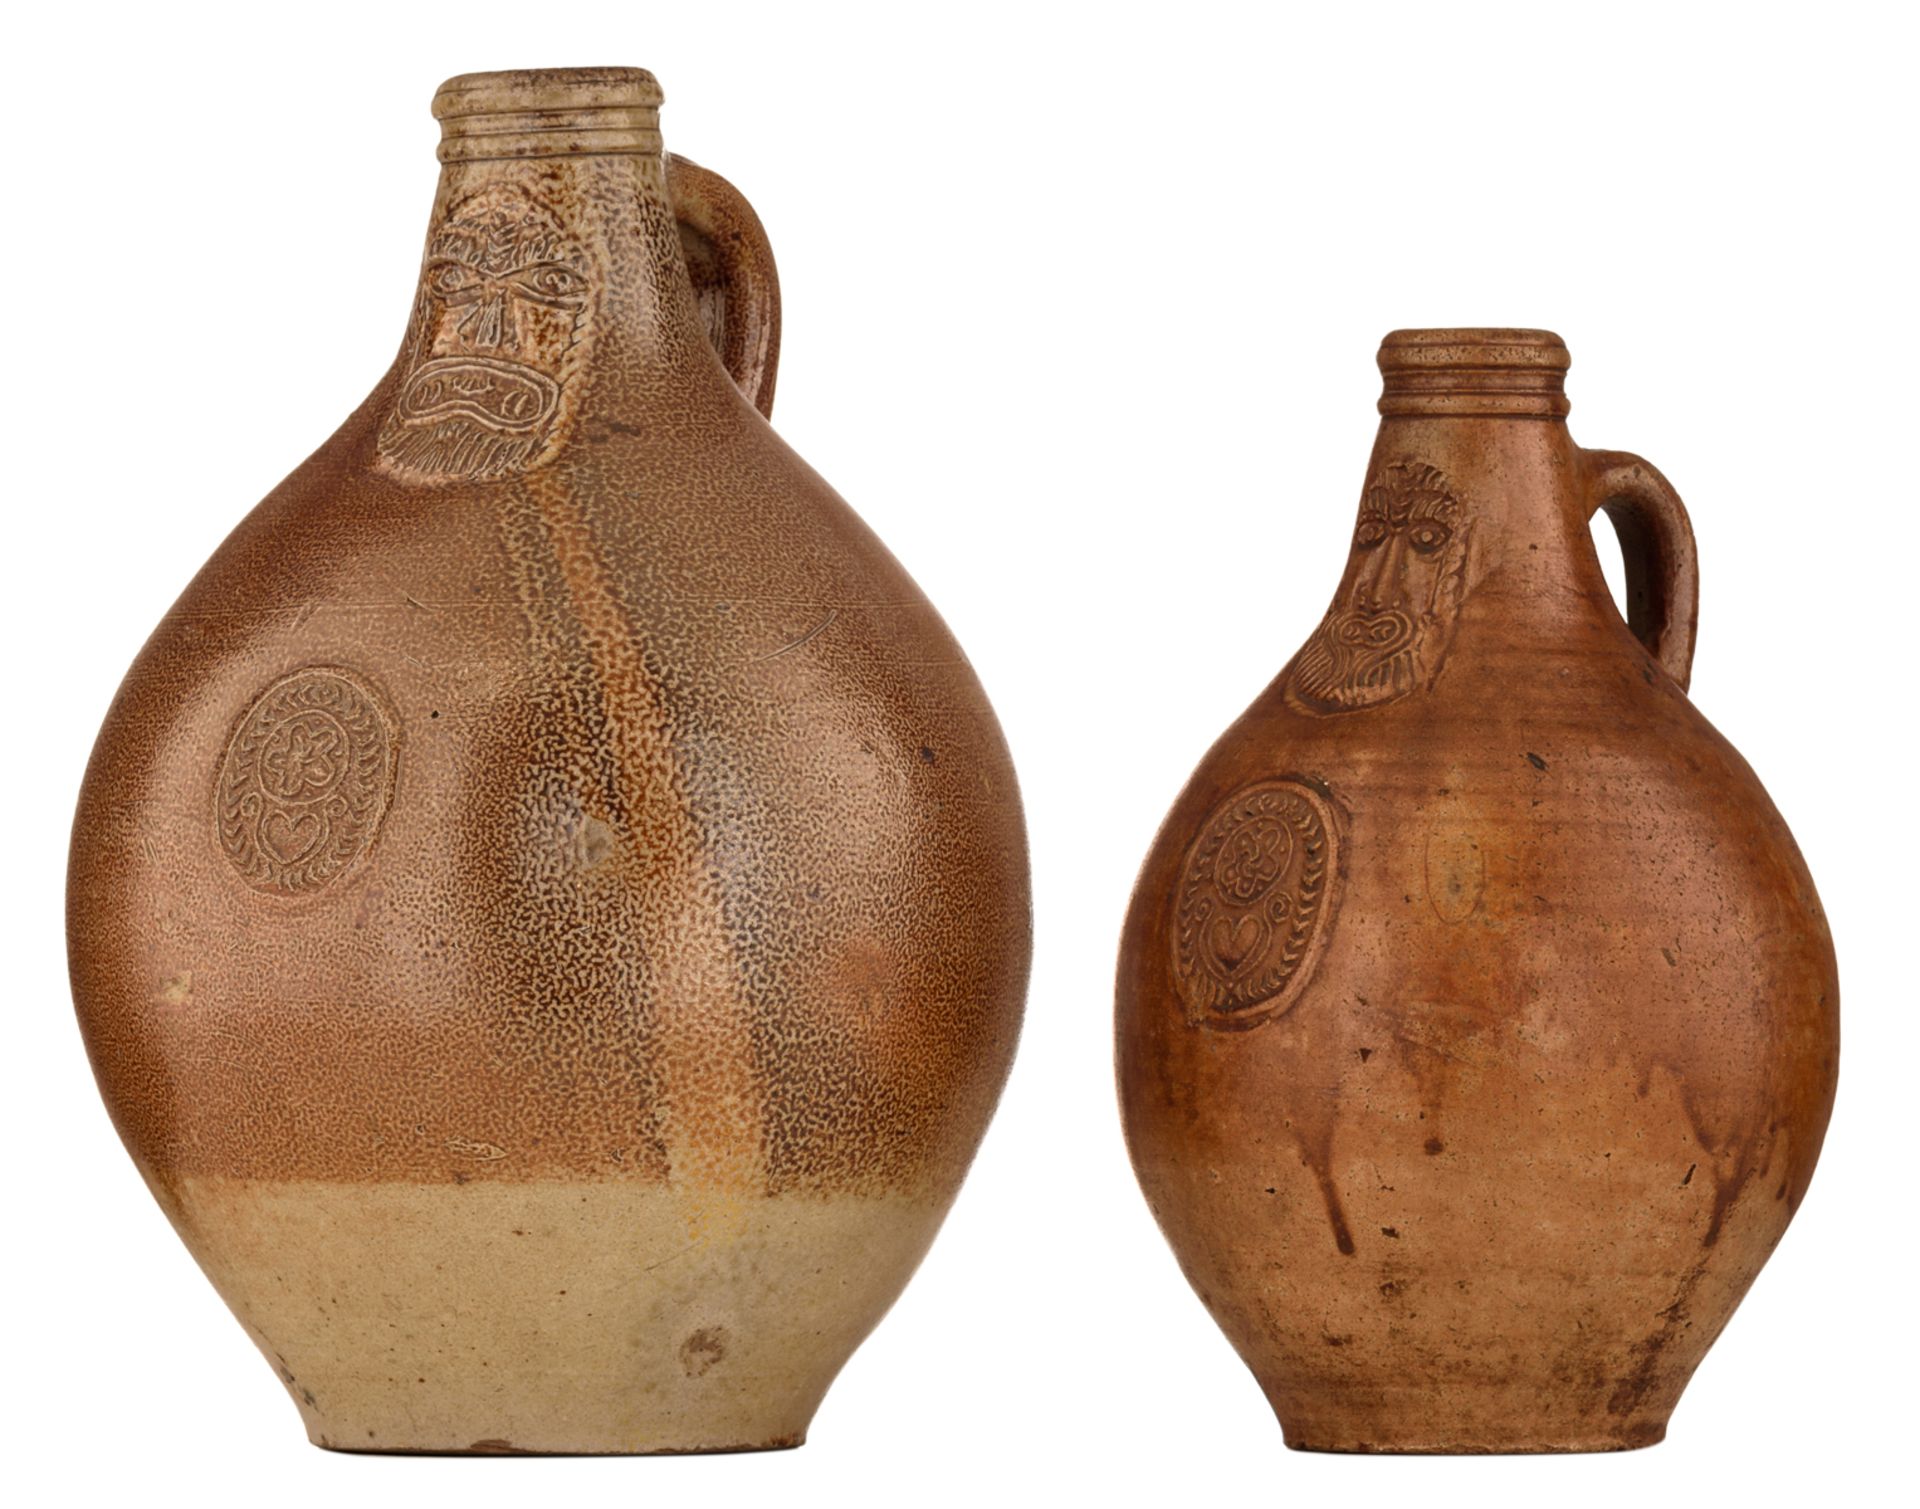 Two Cologne stoneware bellarmine jugs, decorated with a medallion, 17thC, H 27- 33 cm